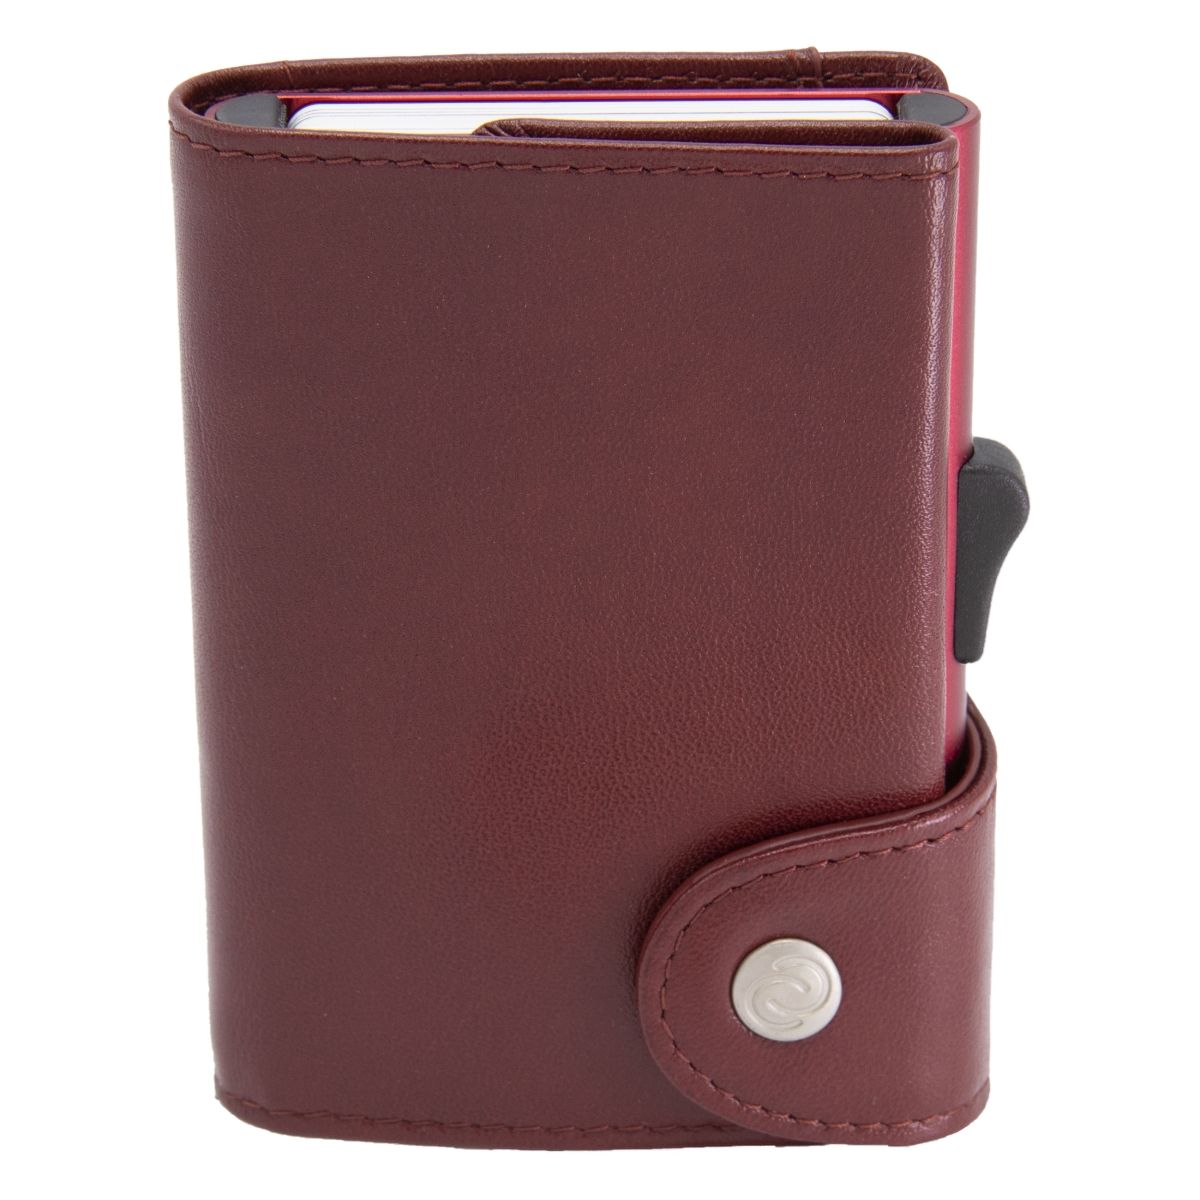 C-Secure XL Aluminum Wallet with Genuine Leather and Coins Pocket - Red